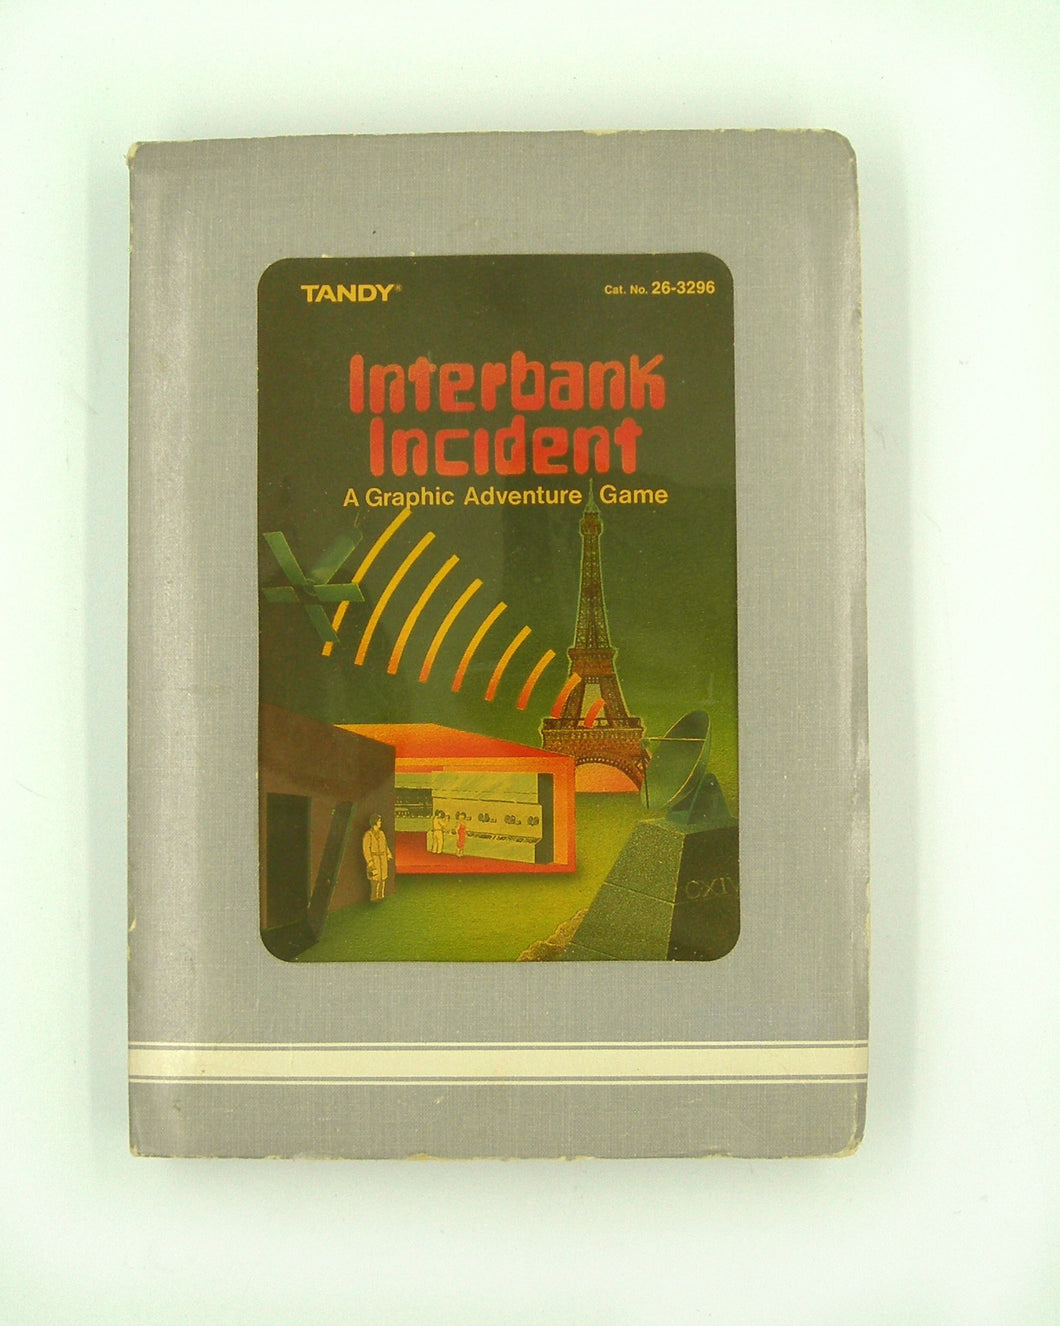 Tandy Color Computer 2,3 disk - Interbank Incident 26-3296 (open)